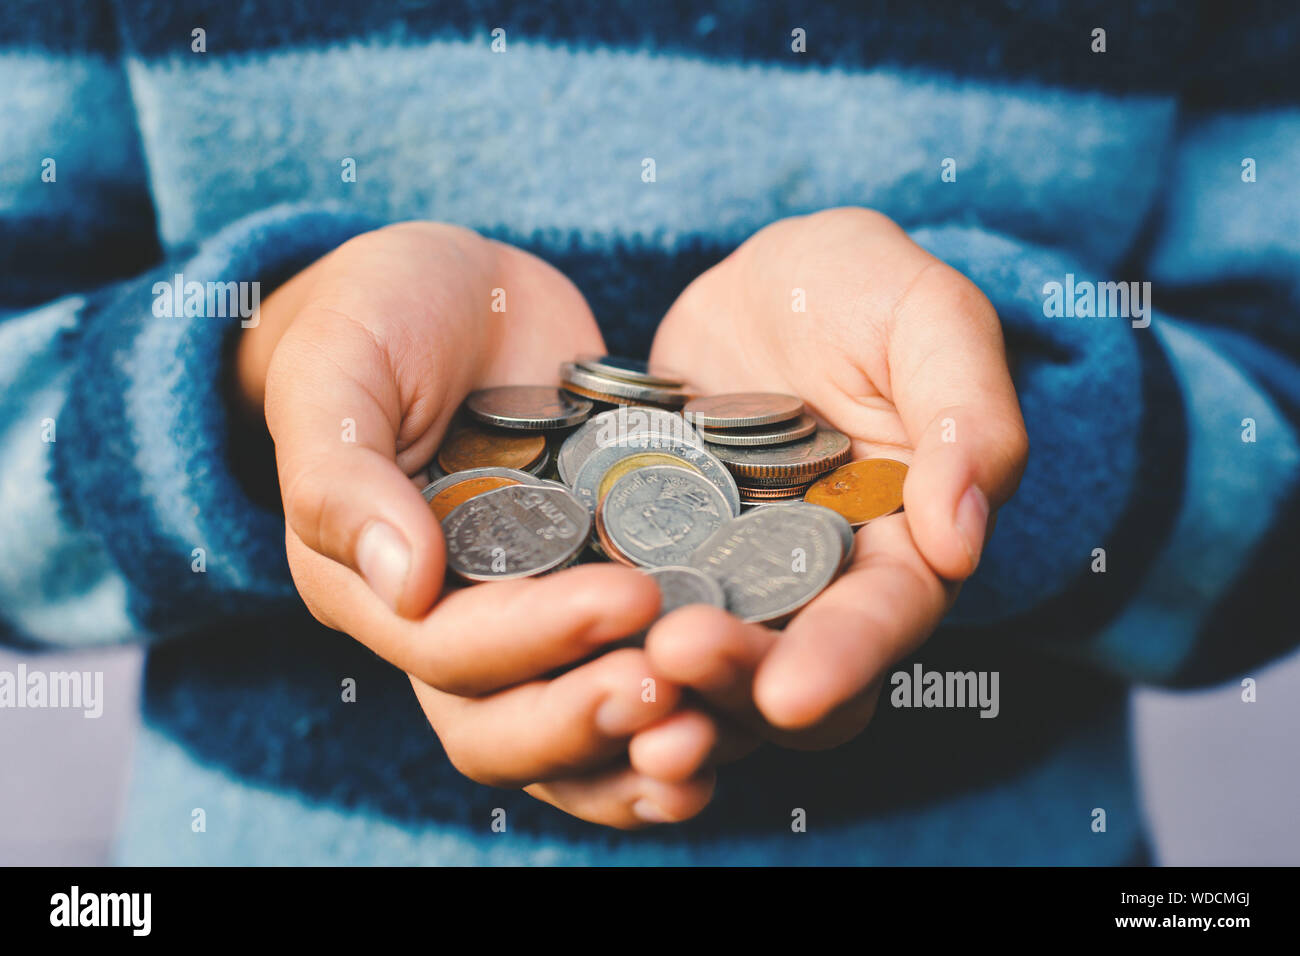 Midsection Of Woman Holding Coins Stock Photo